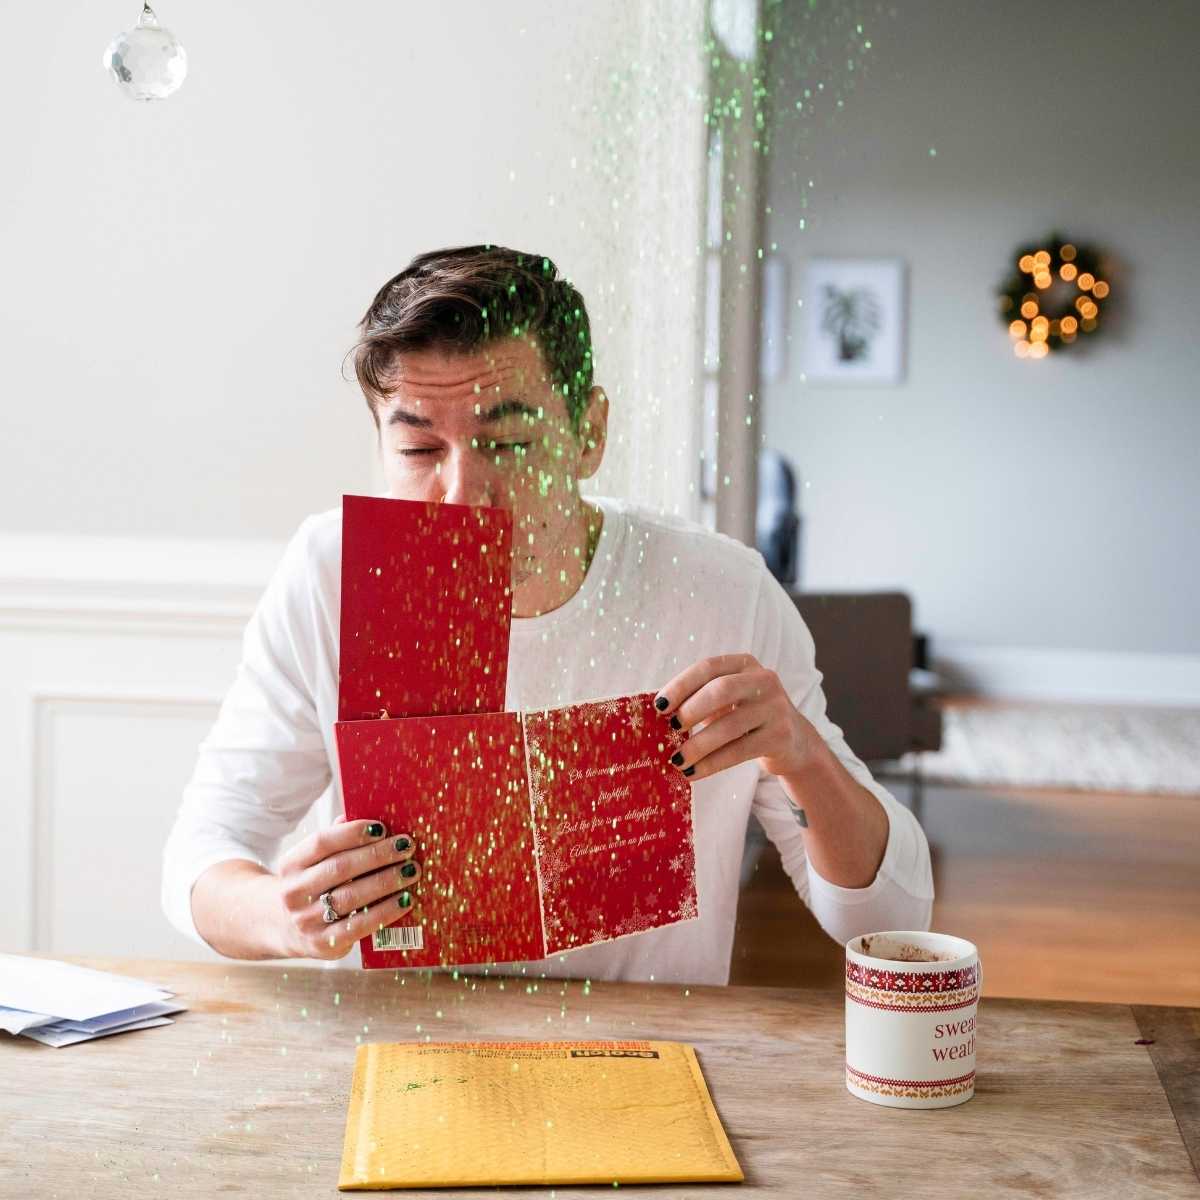 Let It Snow Glitter Bomb Card Pranks Anonymous send hilarious pranks and gag gifts to your friends or family.